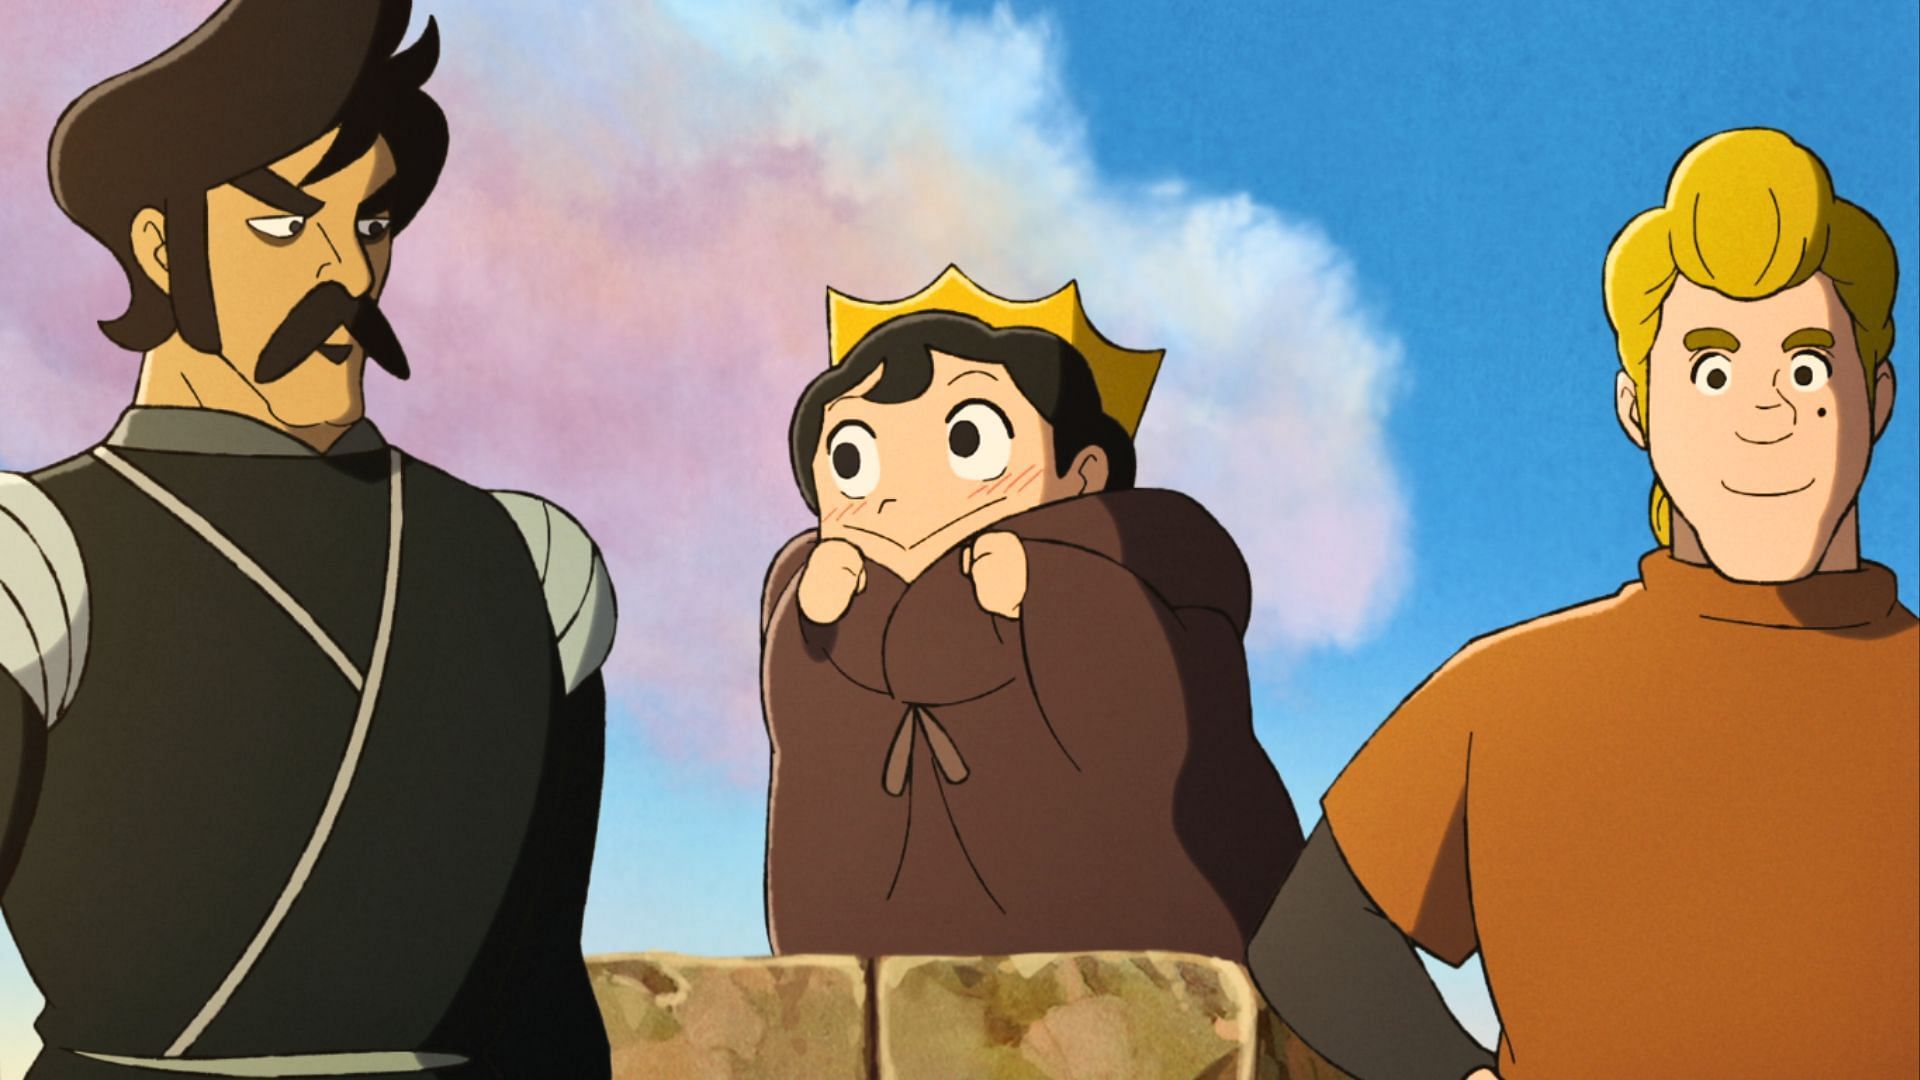 Ranking of Kings: The Treasure Chest of Courage episode 6: Bojji missing  Kage and Daida following Bojji's Path